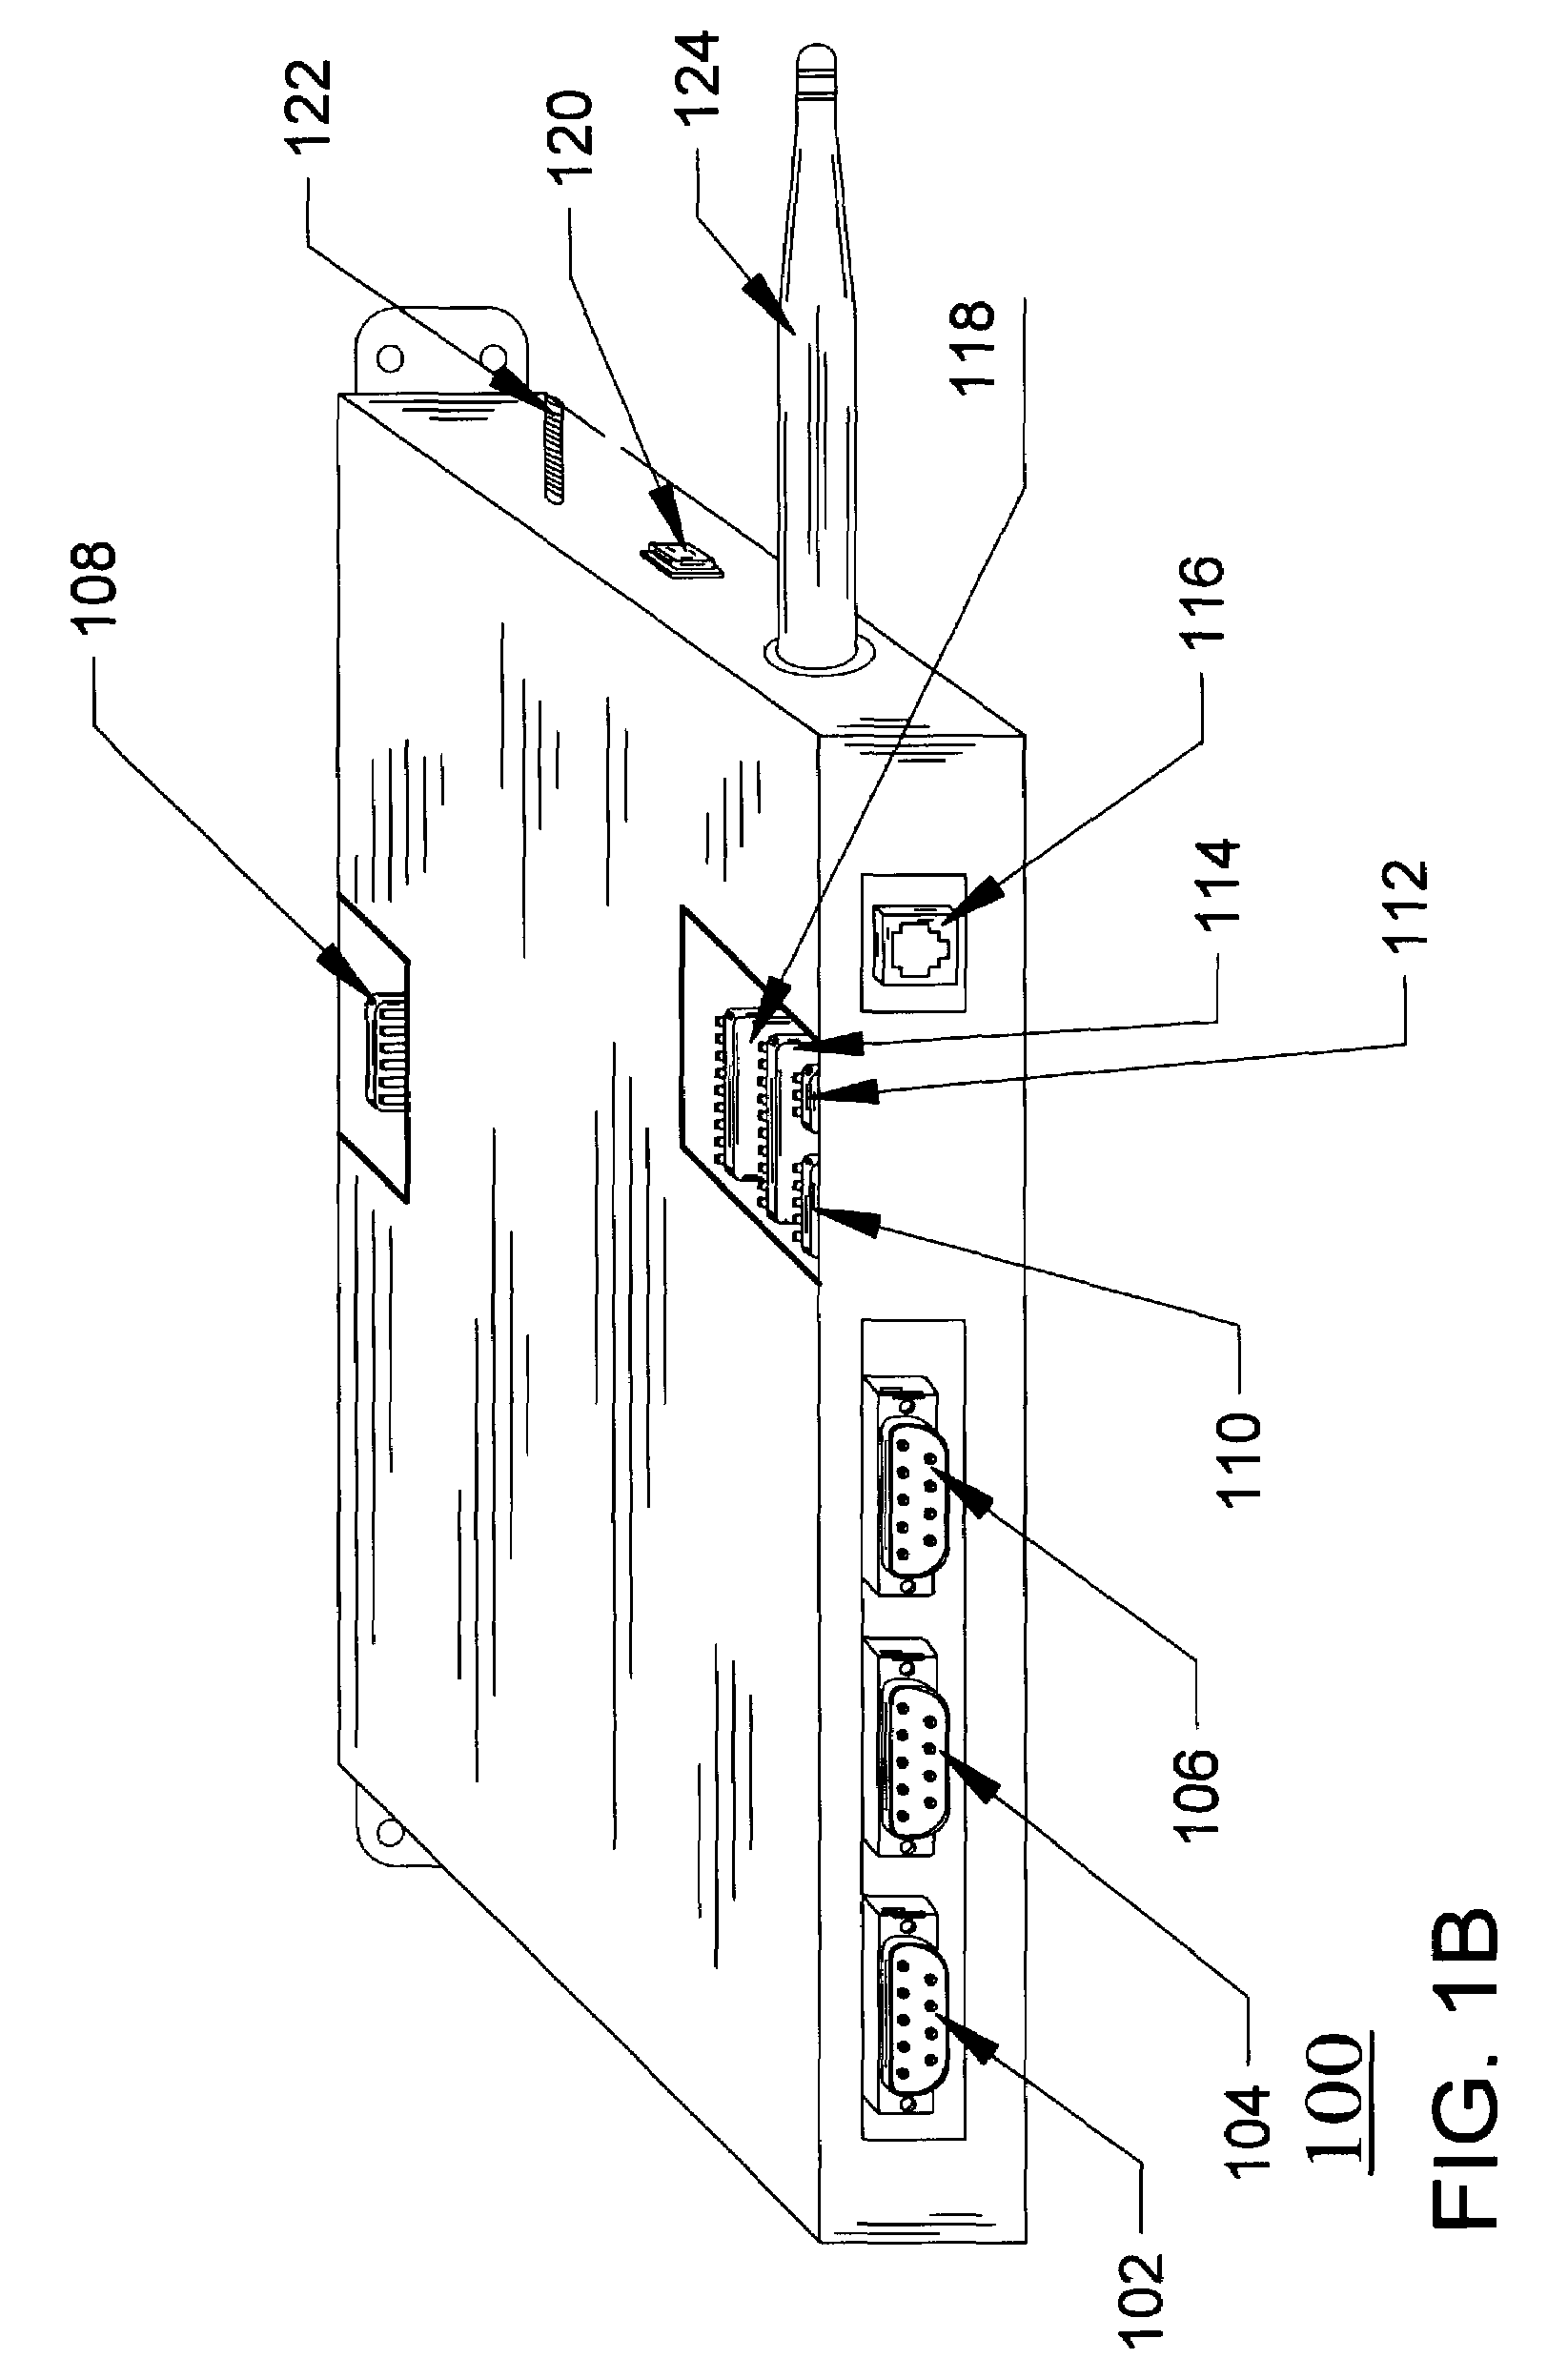 System and method for locally authorizing cashless transactions at point of sale